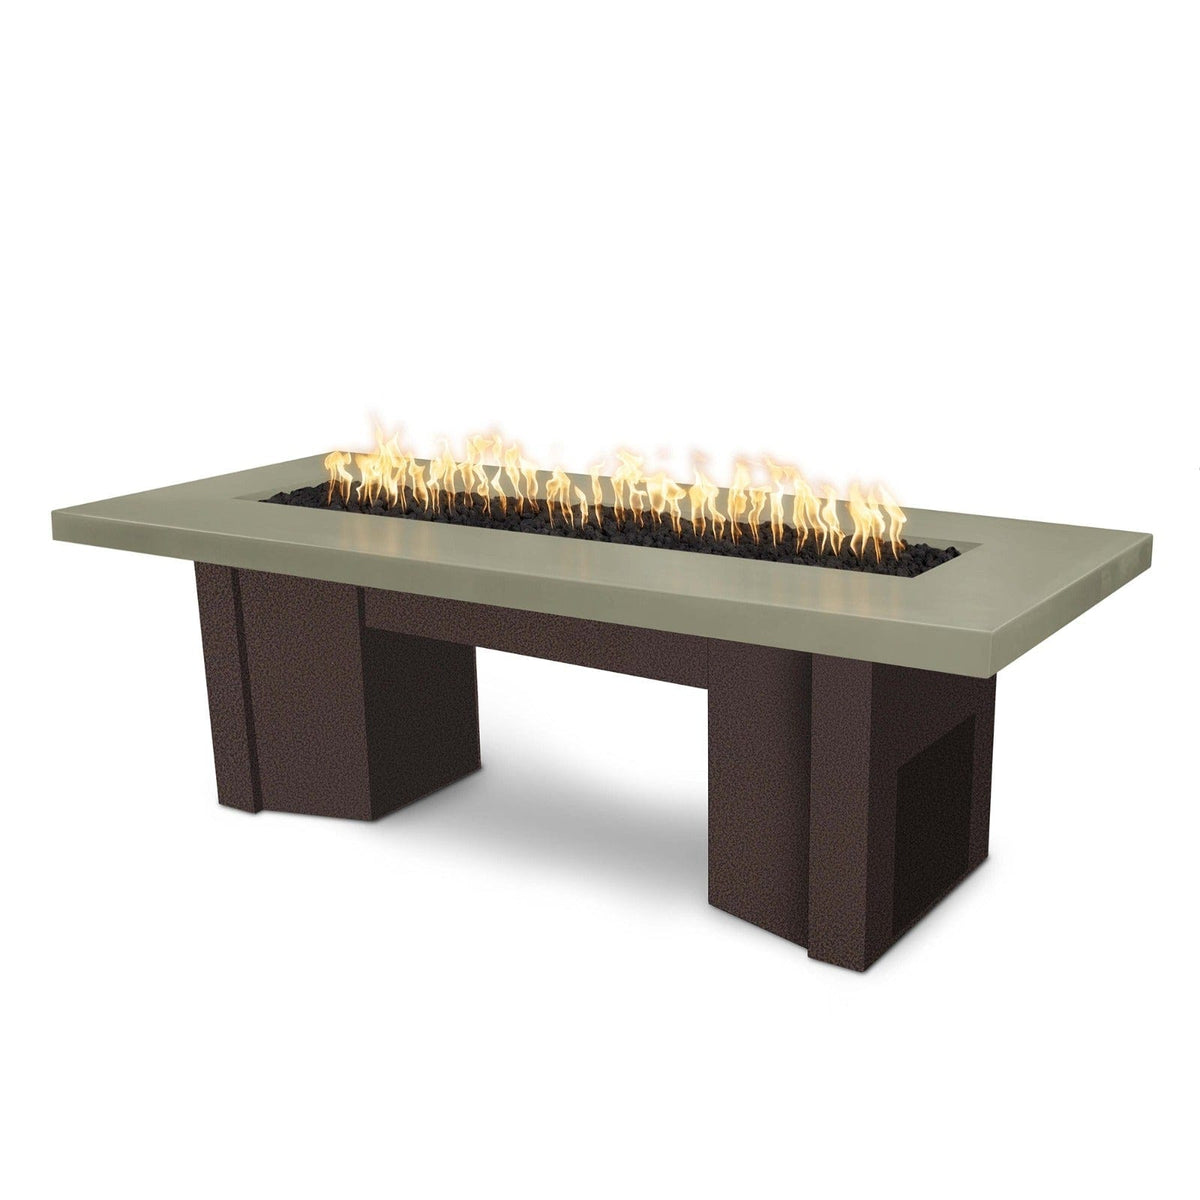 The Outdoor Plus Fire Features Ash (-ASH) / Copper Vein Powder Coated Steel (-CPV) The Outdoor Plus 60&quot; Alameda Fire Table Smooth Concrete in Liquid Propane - Match Lit with Flame Sense System / OPT-ALMGFRC60FSML-LP